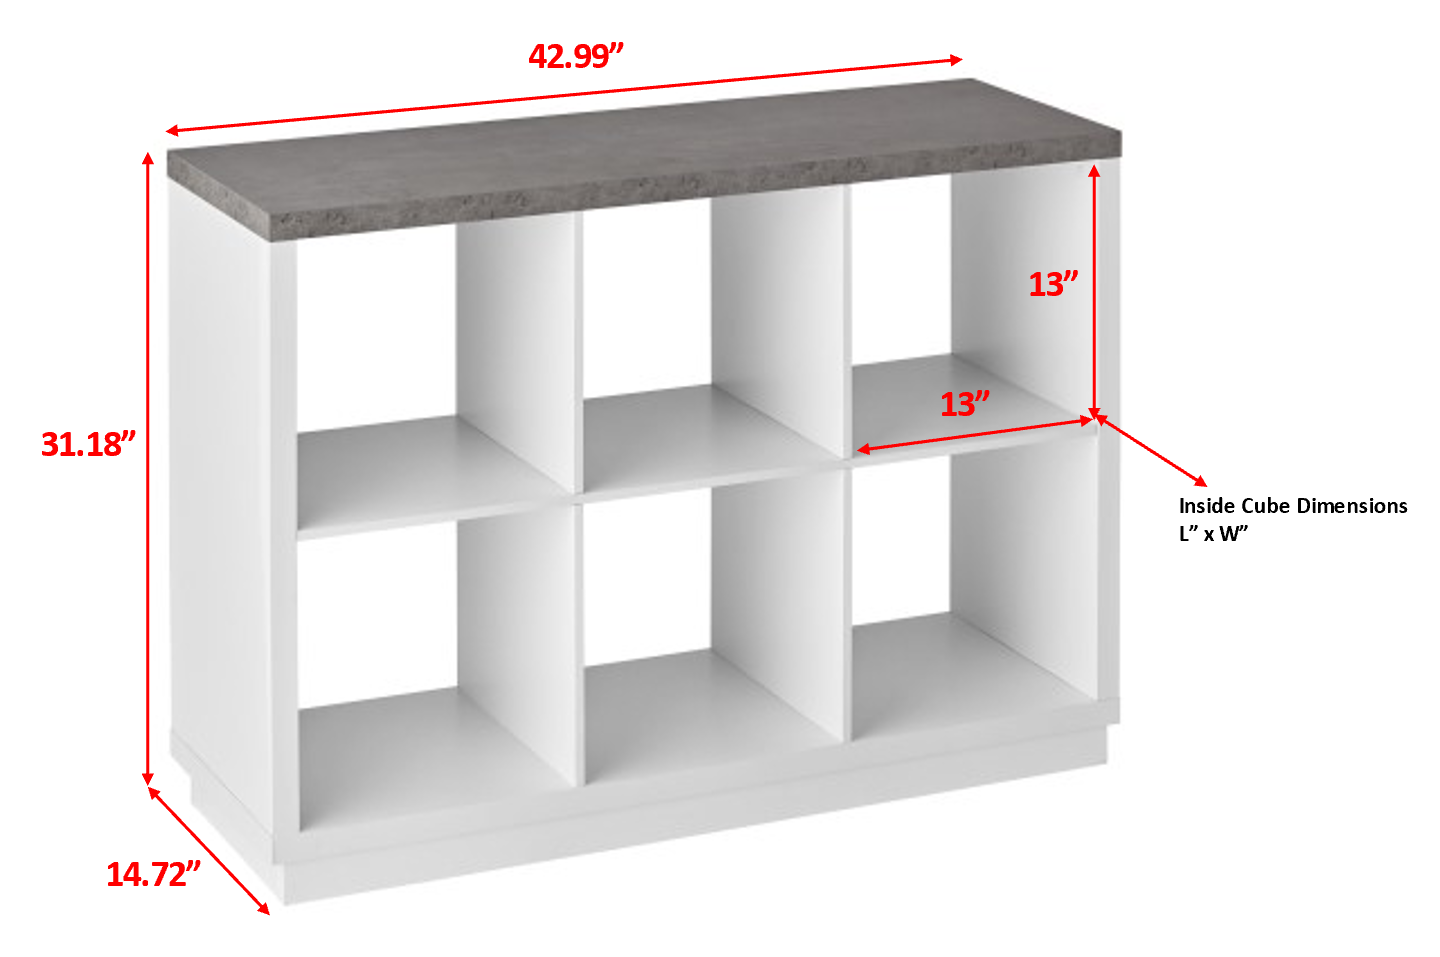 Build Your Own Furniture 6-Cube Organizer, White with Faux Concrete Top - image 3 of 6